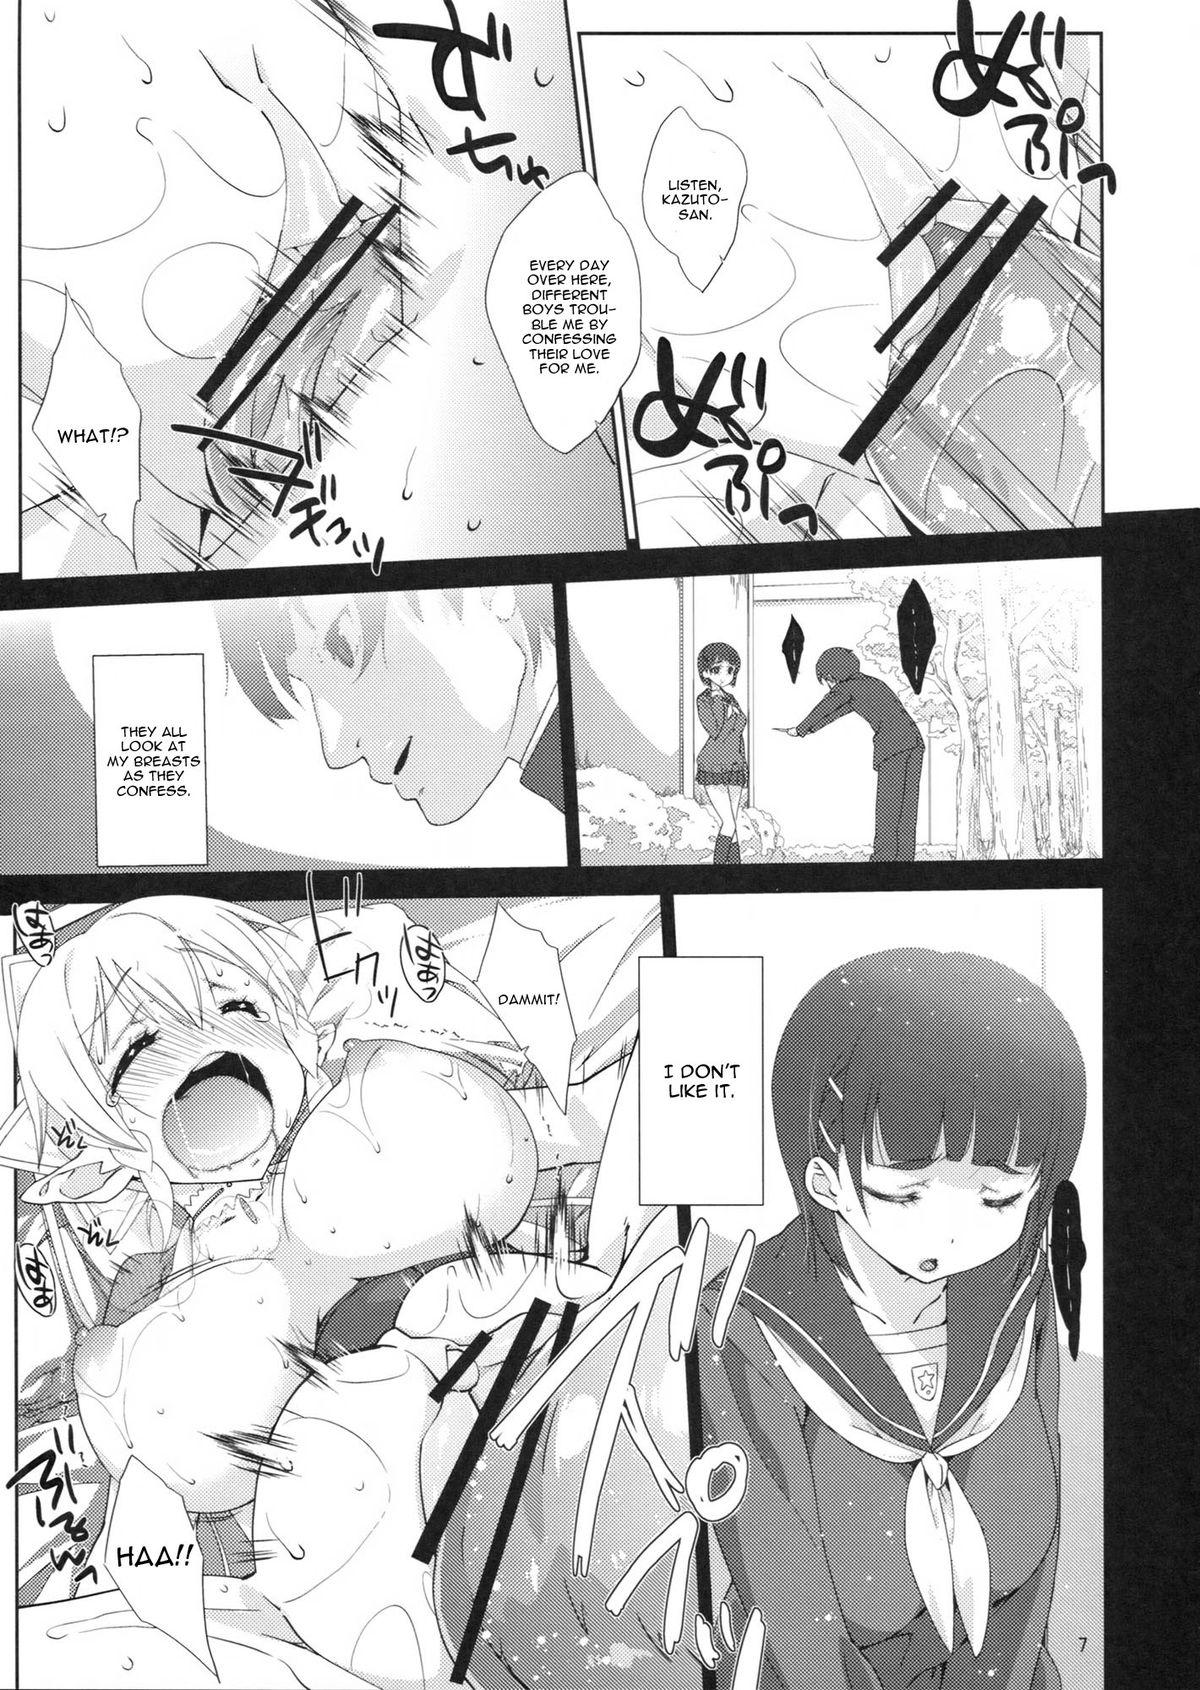 Real Couple Suguha Route. - Sword art online Calcinha - Page 6